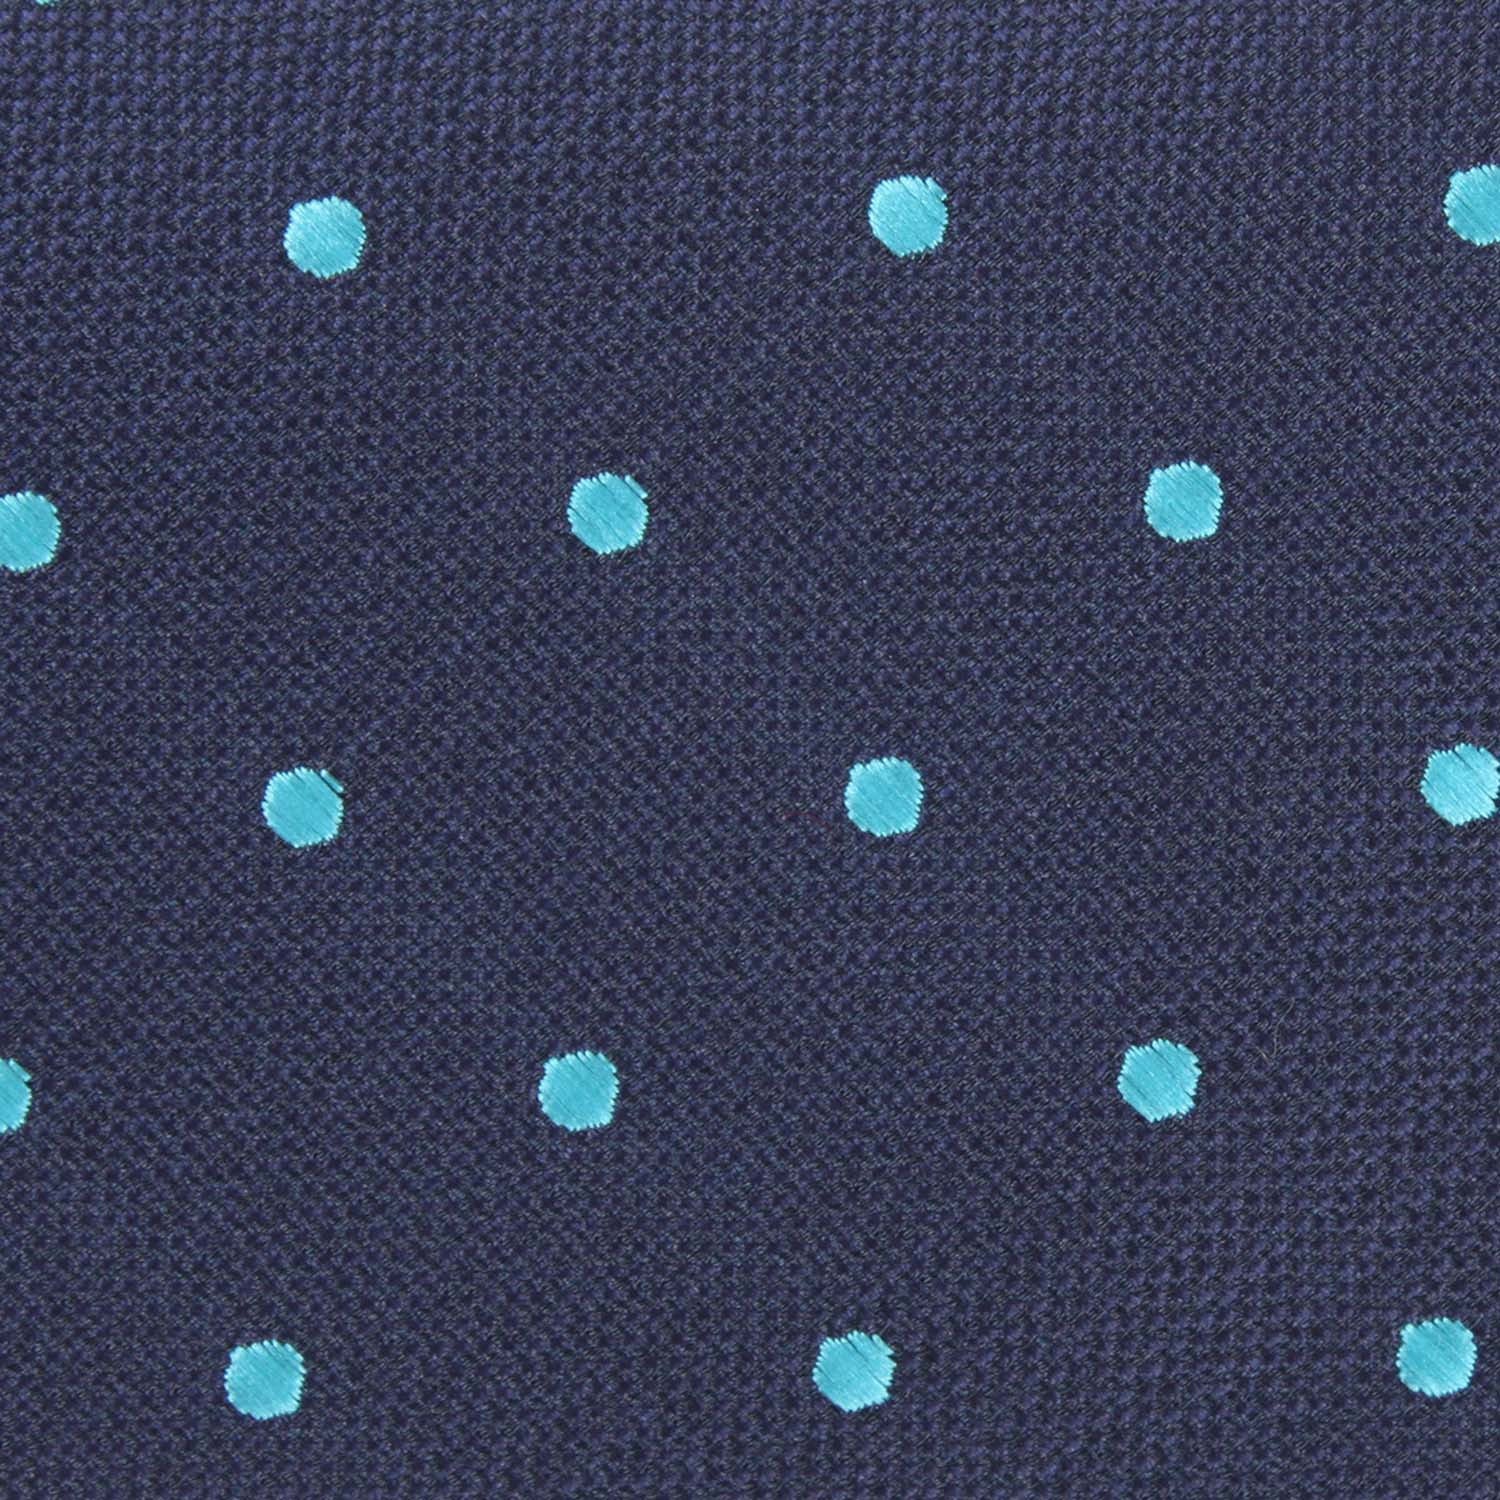 Navy Blue with Mint Blue Polka Dots Fabric Self Tie Bow Tie M127